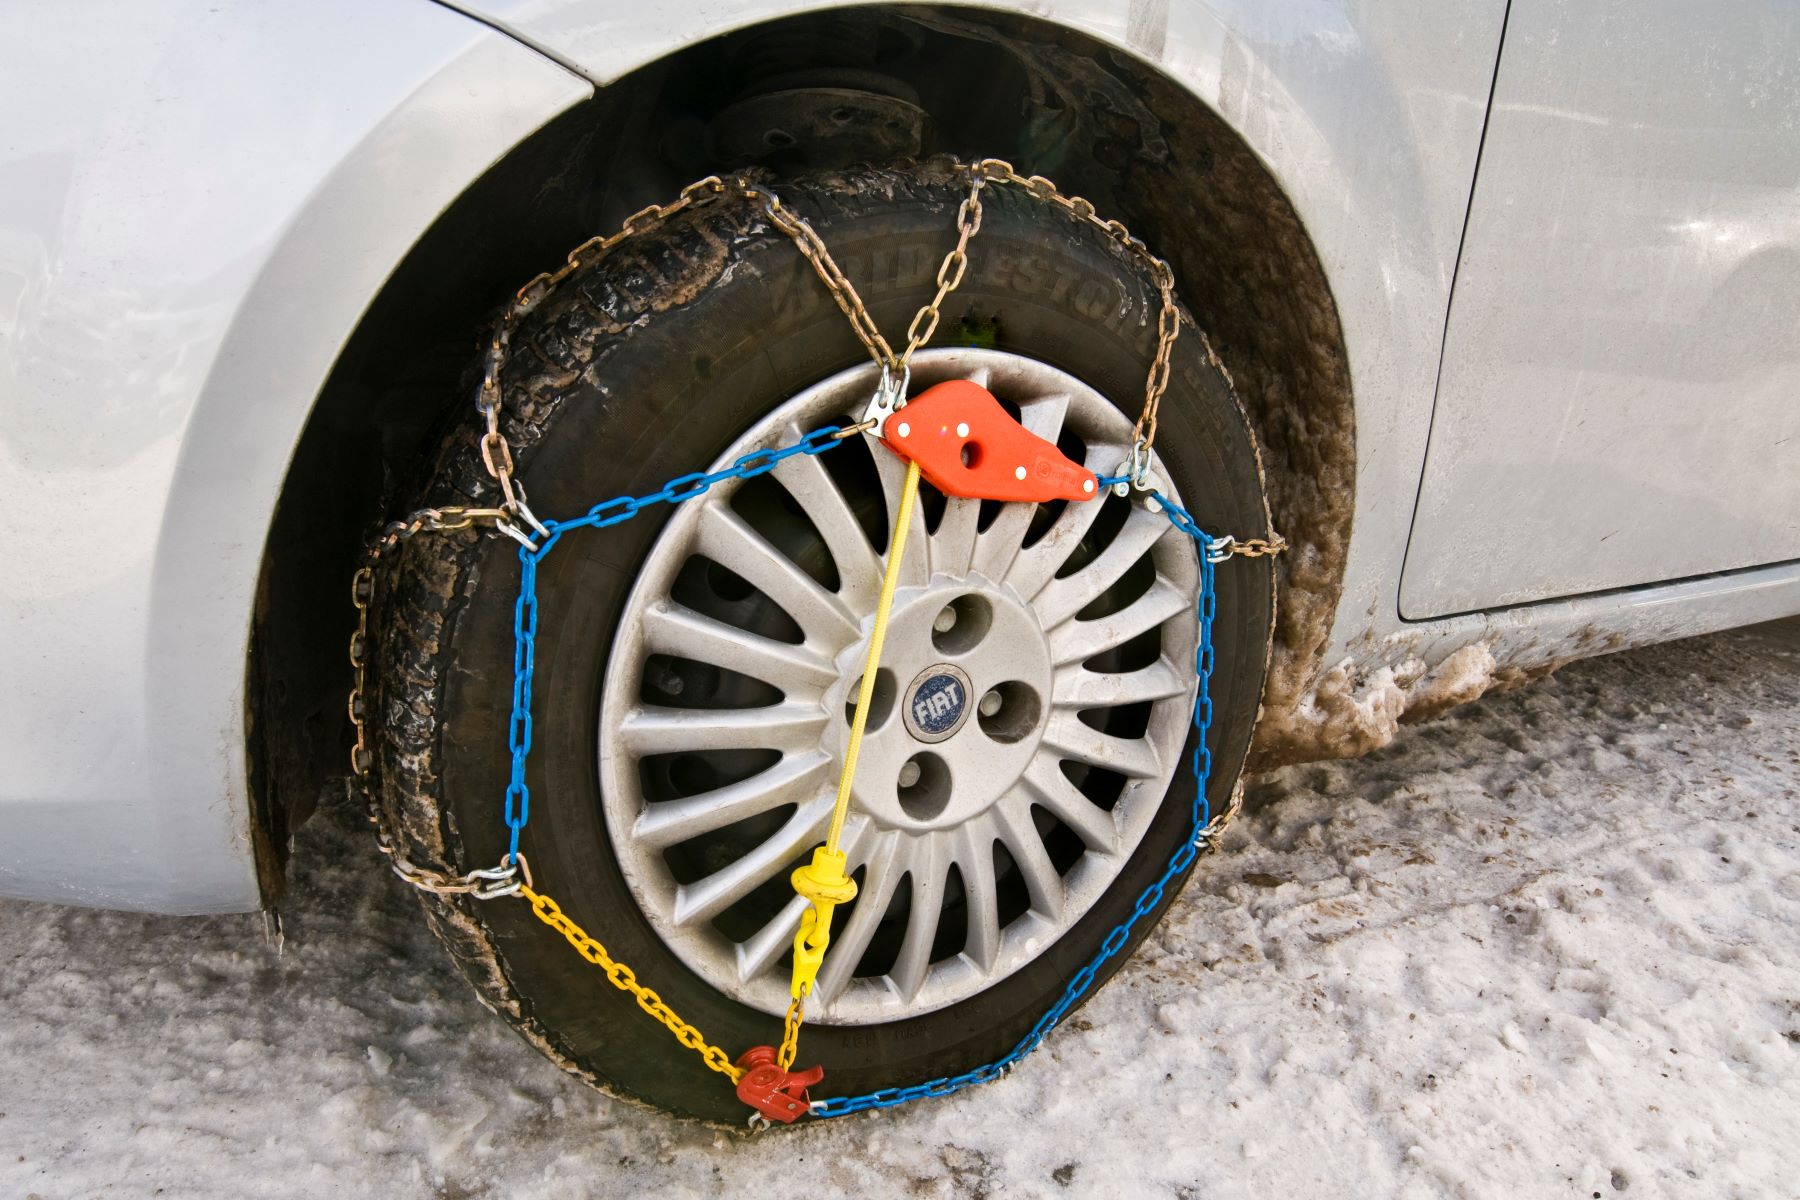 A Fiat car with a tire chain attached for driving conditions in winter and snowy weather